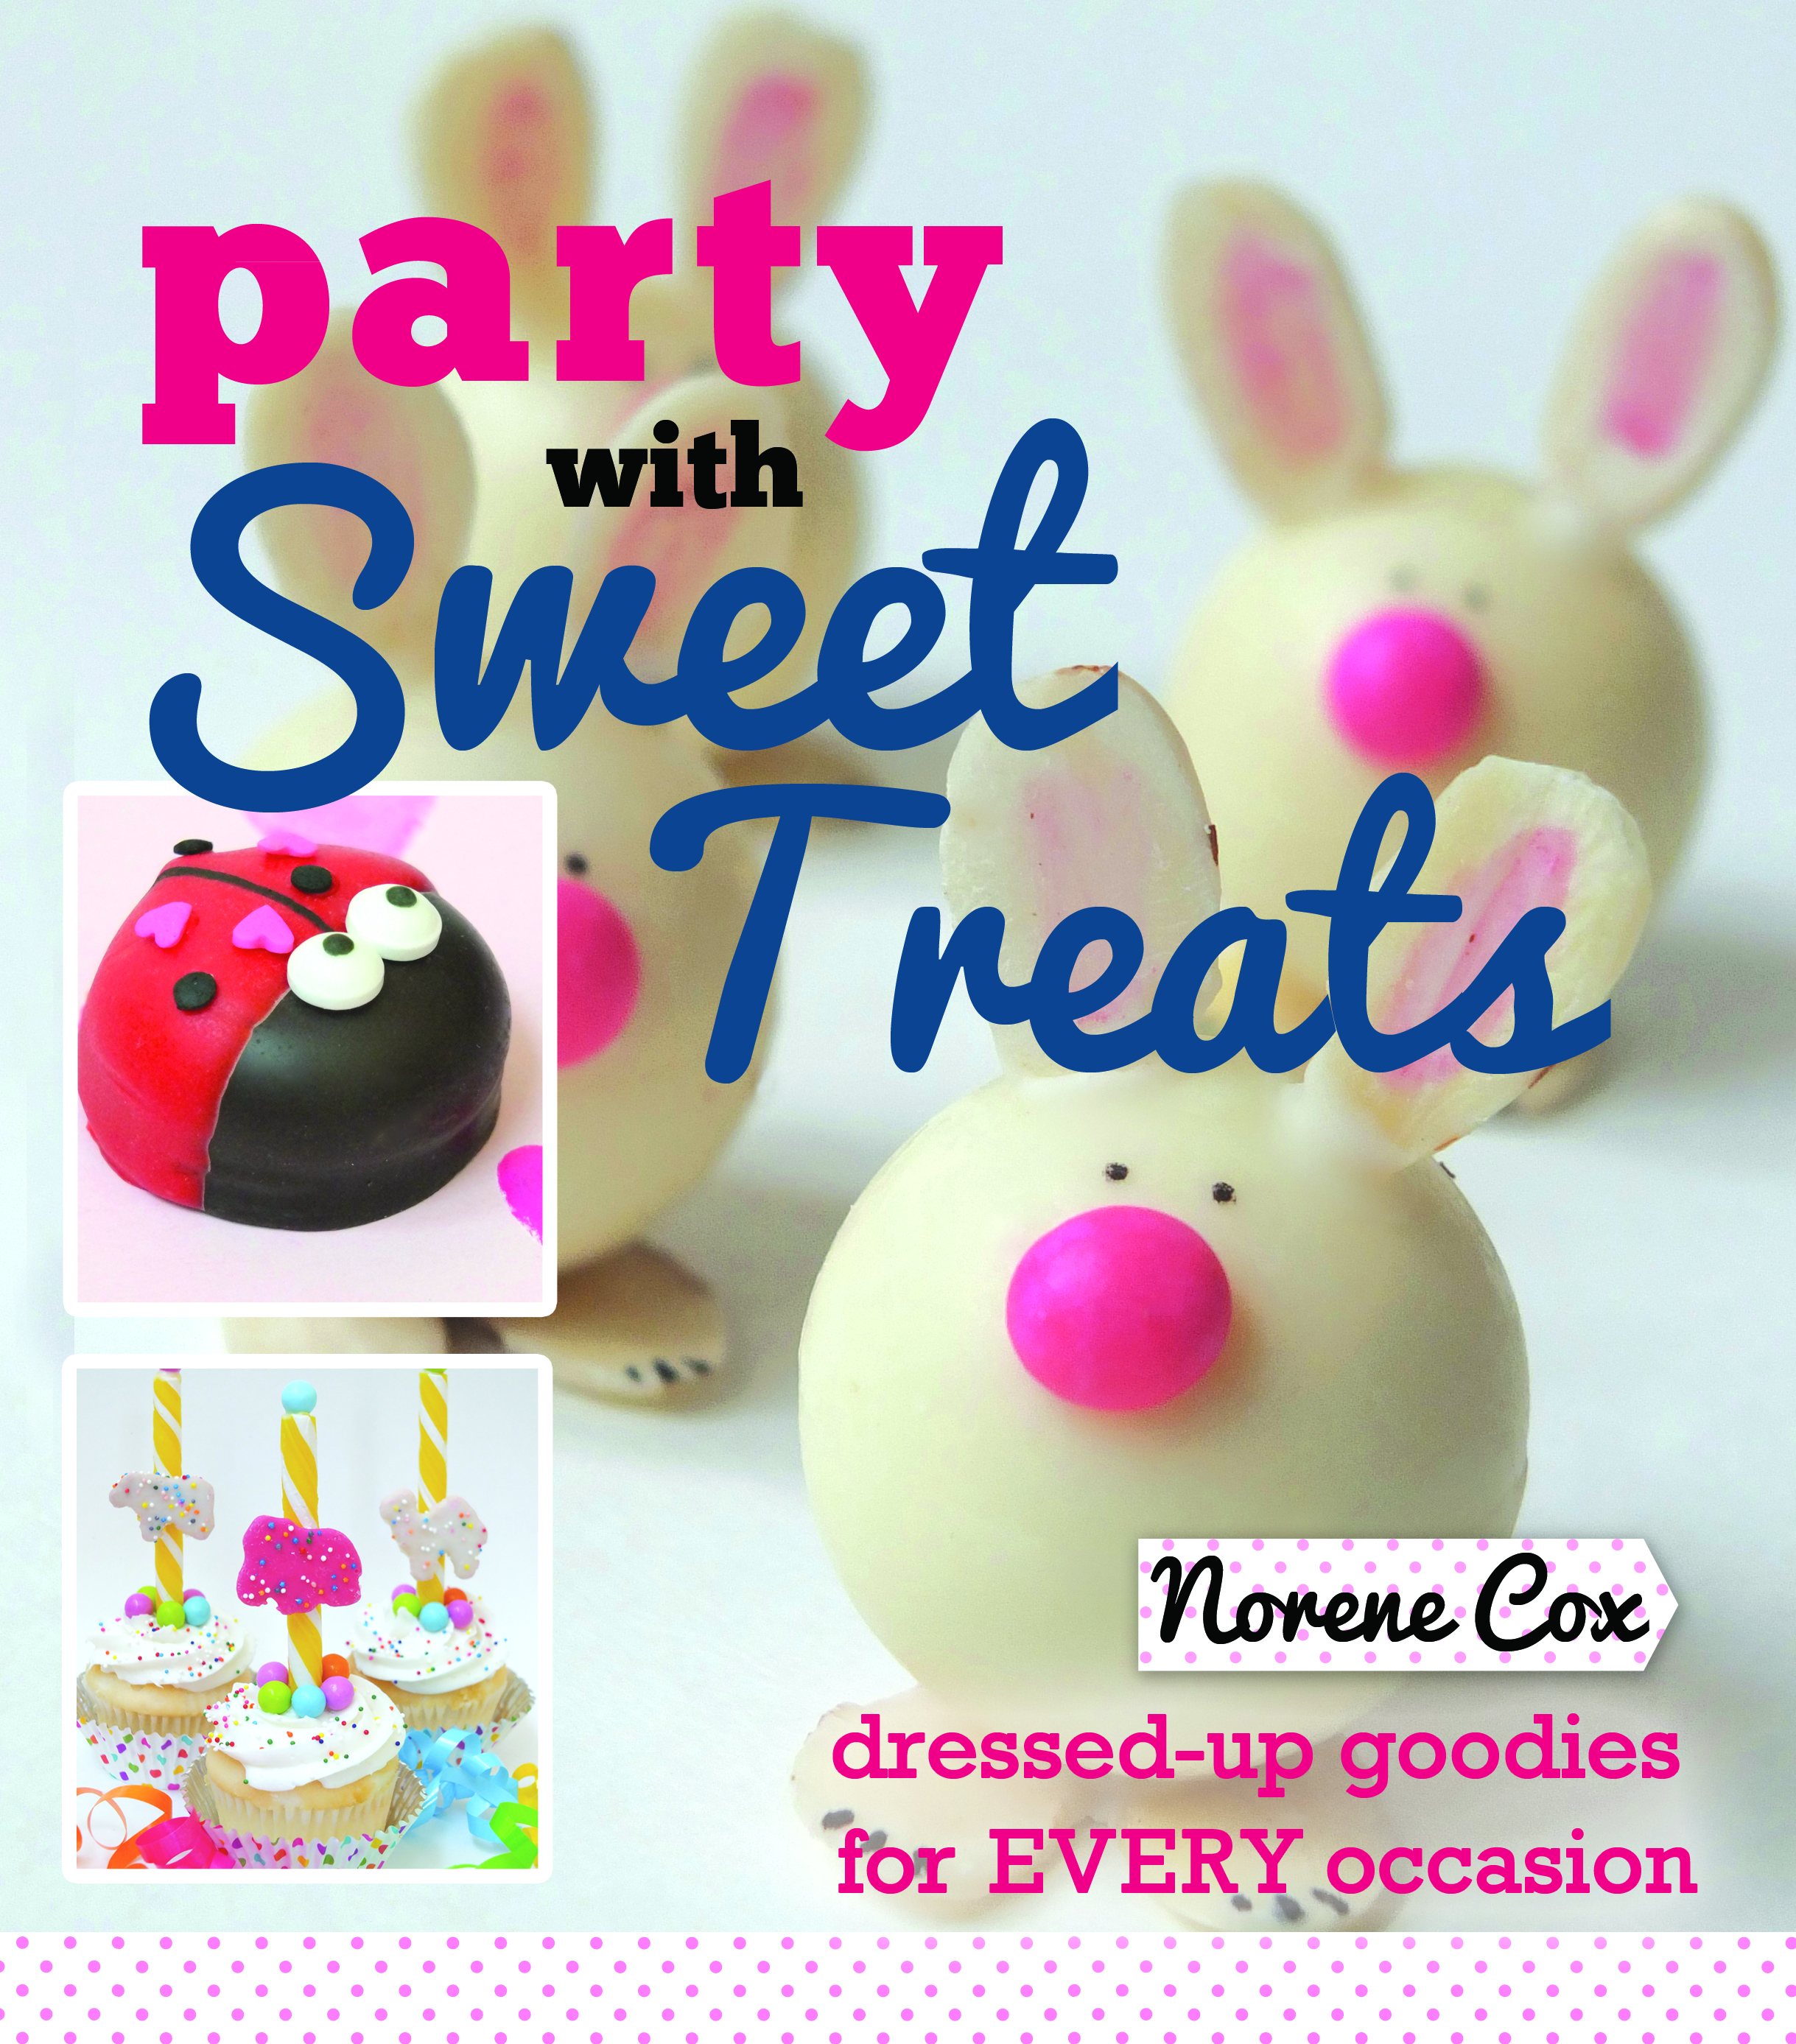 Party with Sweet Treats book by Norene Cox, author Norene Cox, easy dessert party ideas for every occasion